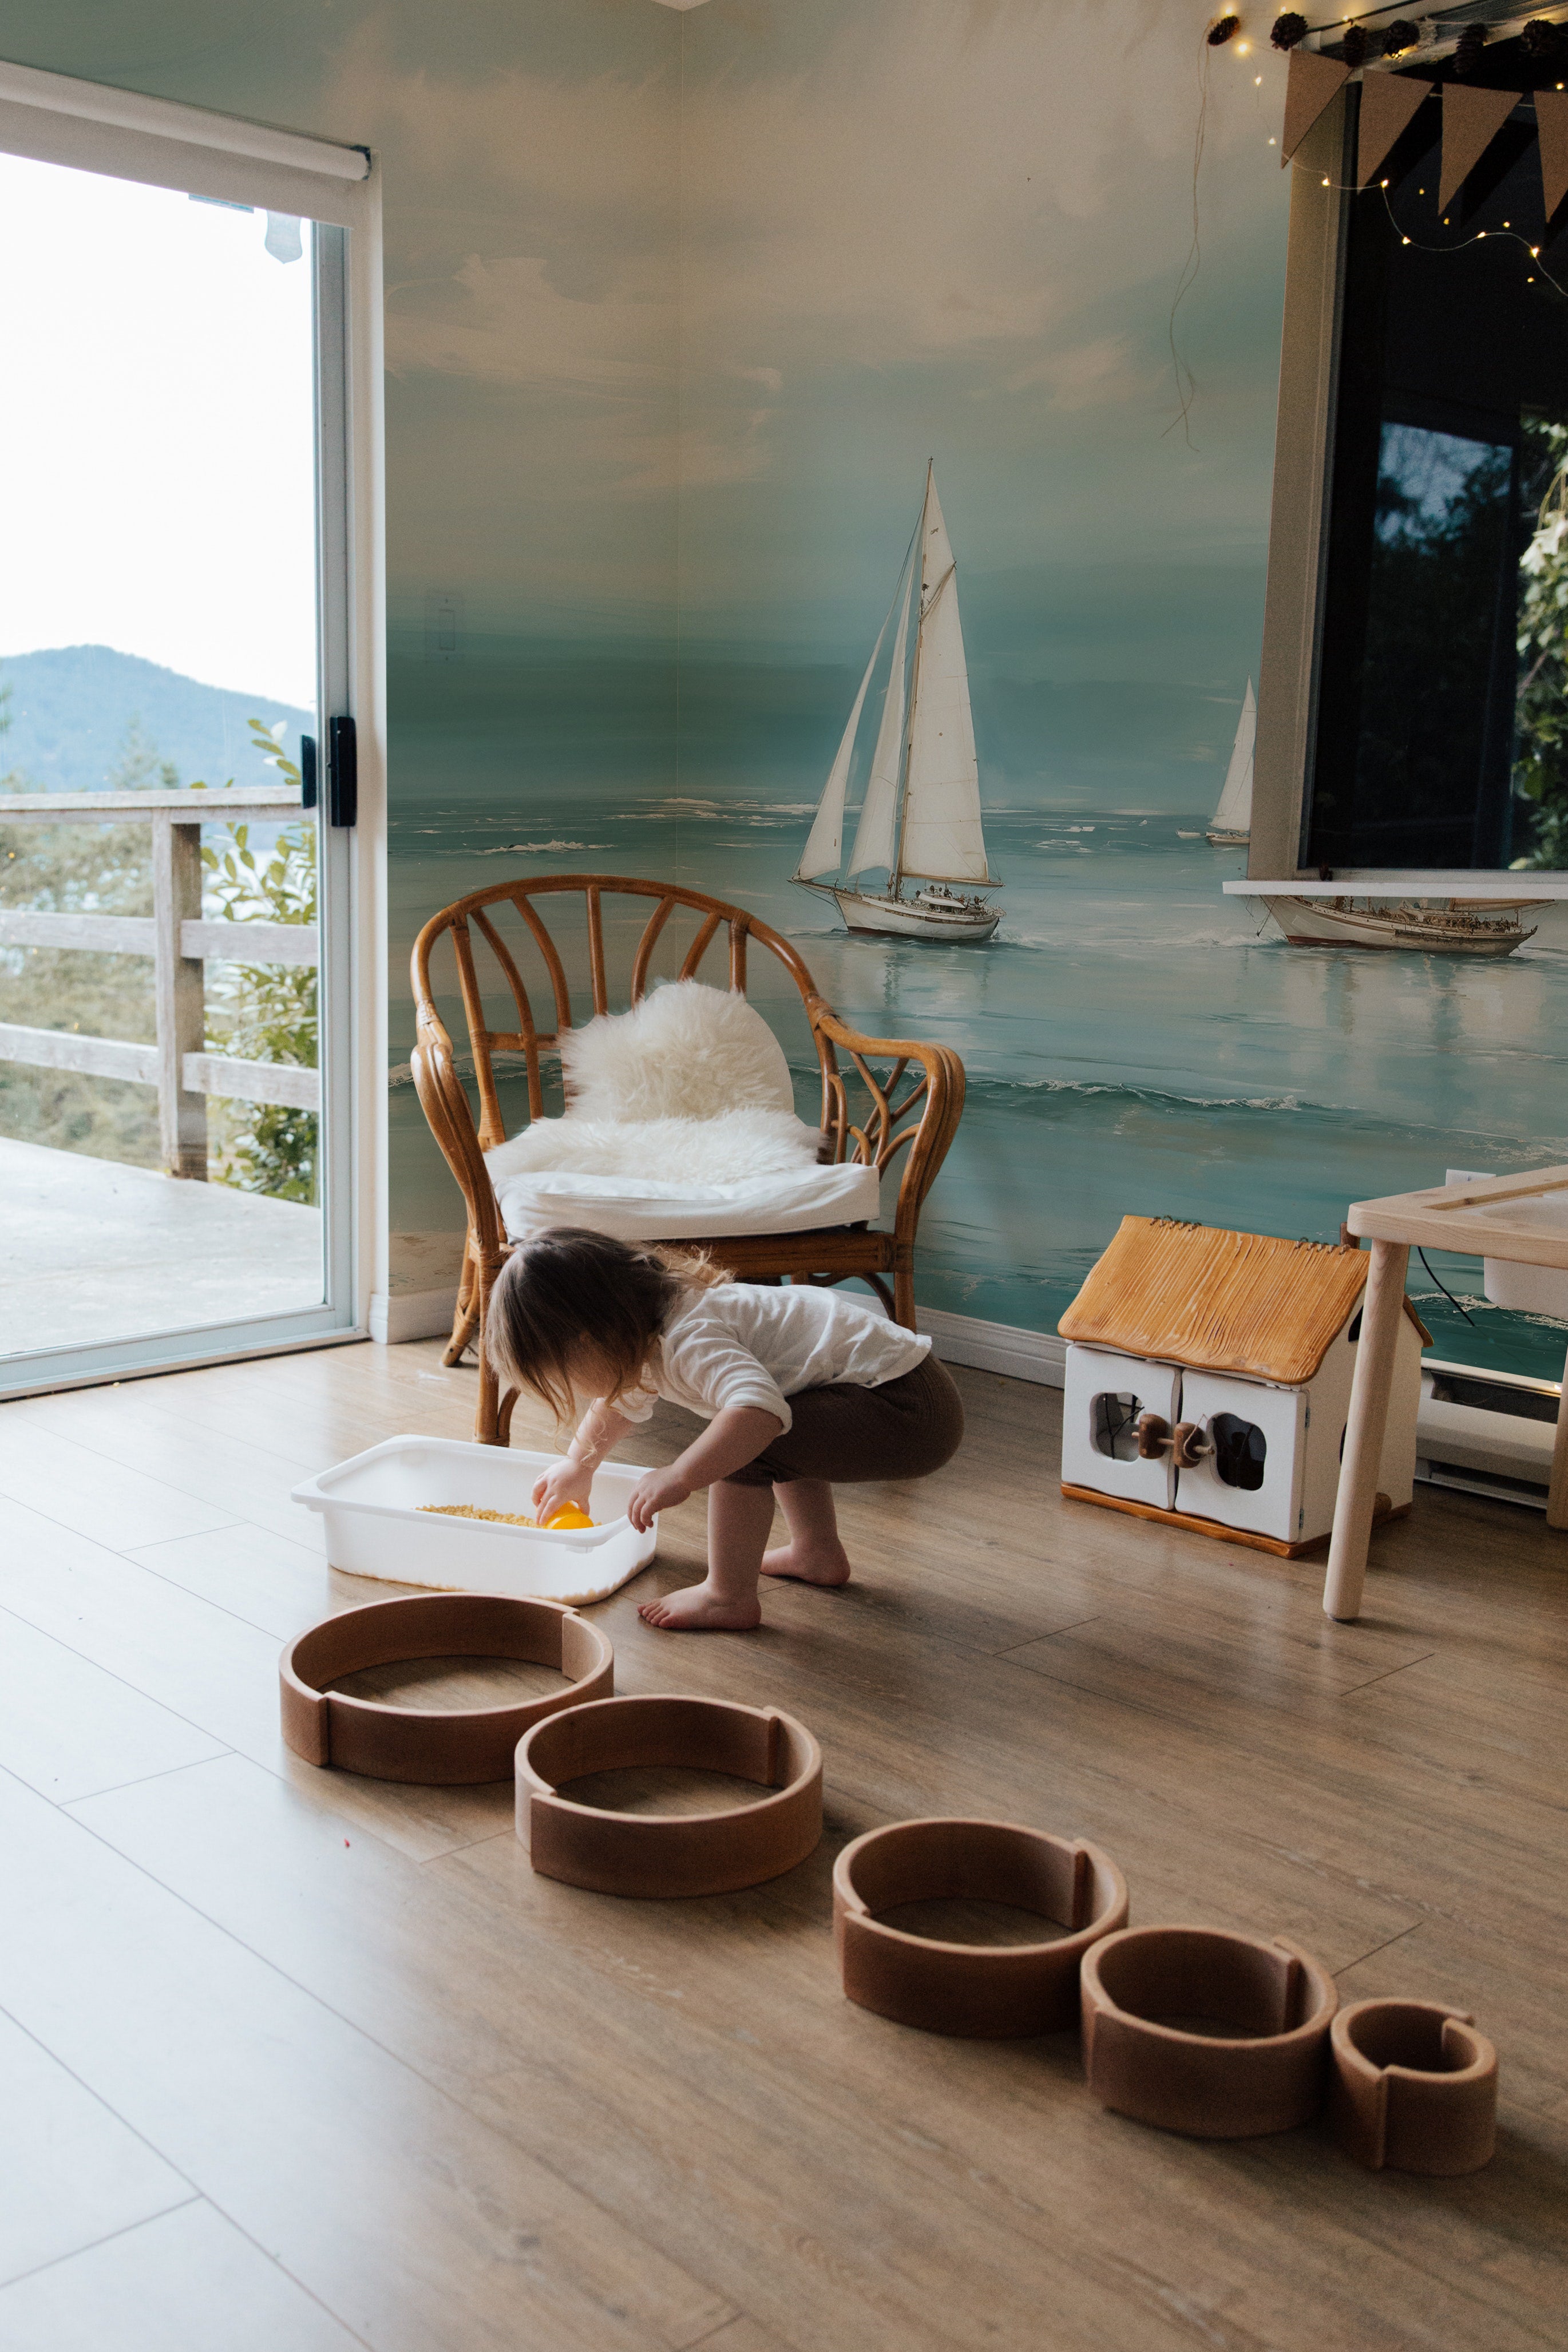 A child's play area enhanced by the Seaside Wallpaper Mural, featuring sailboats and a dreamy seascape. A young child plays on the floor, adding a lively and personal touch to the serene oceanic backdrop.